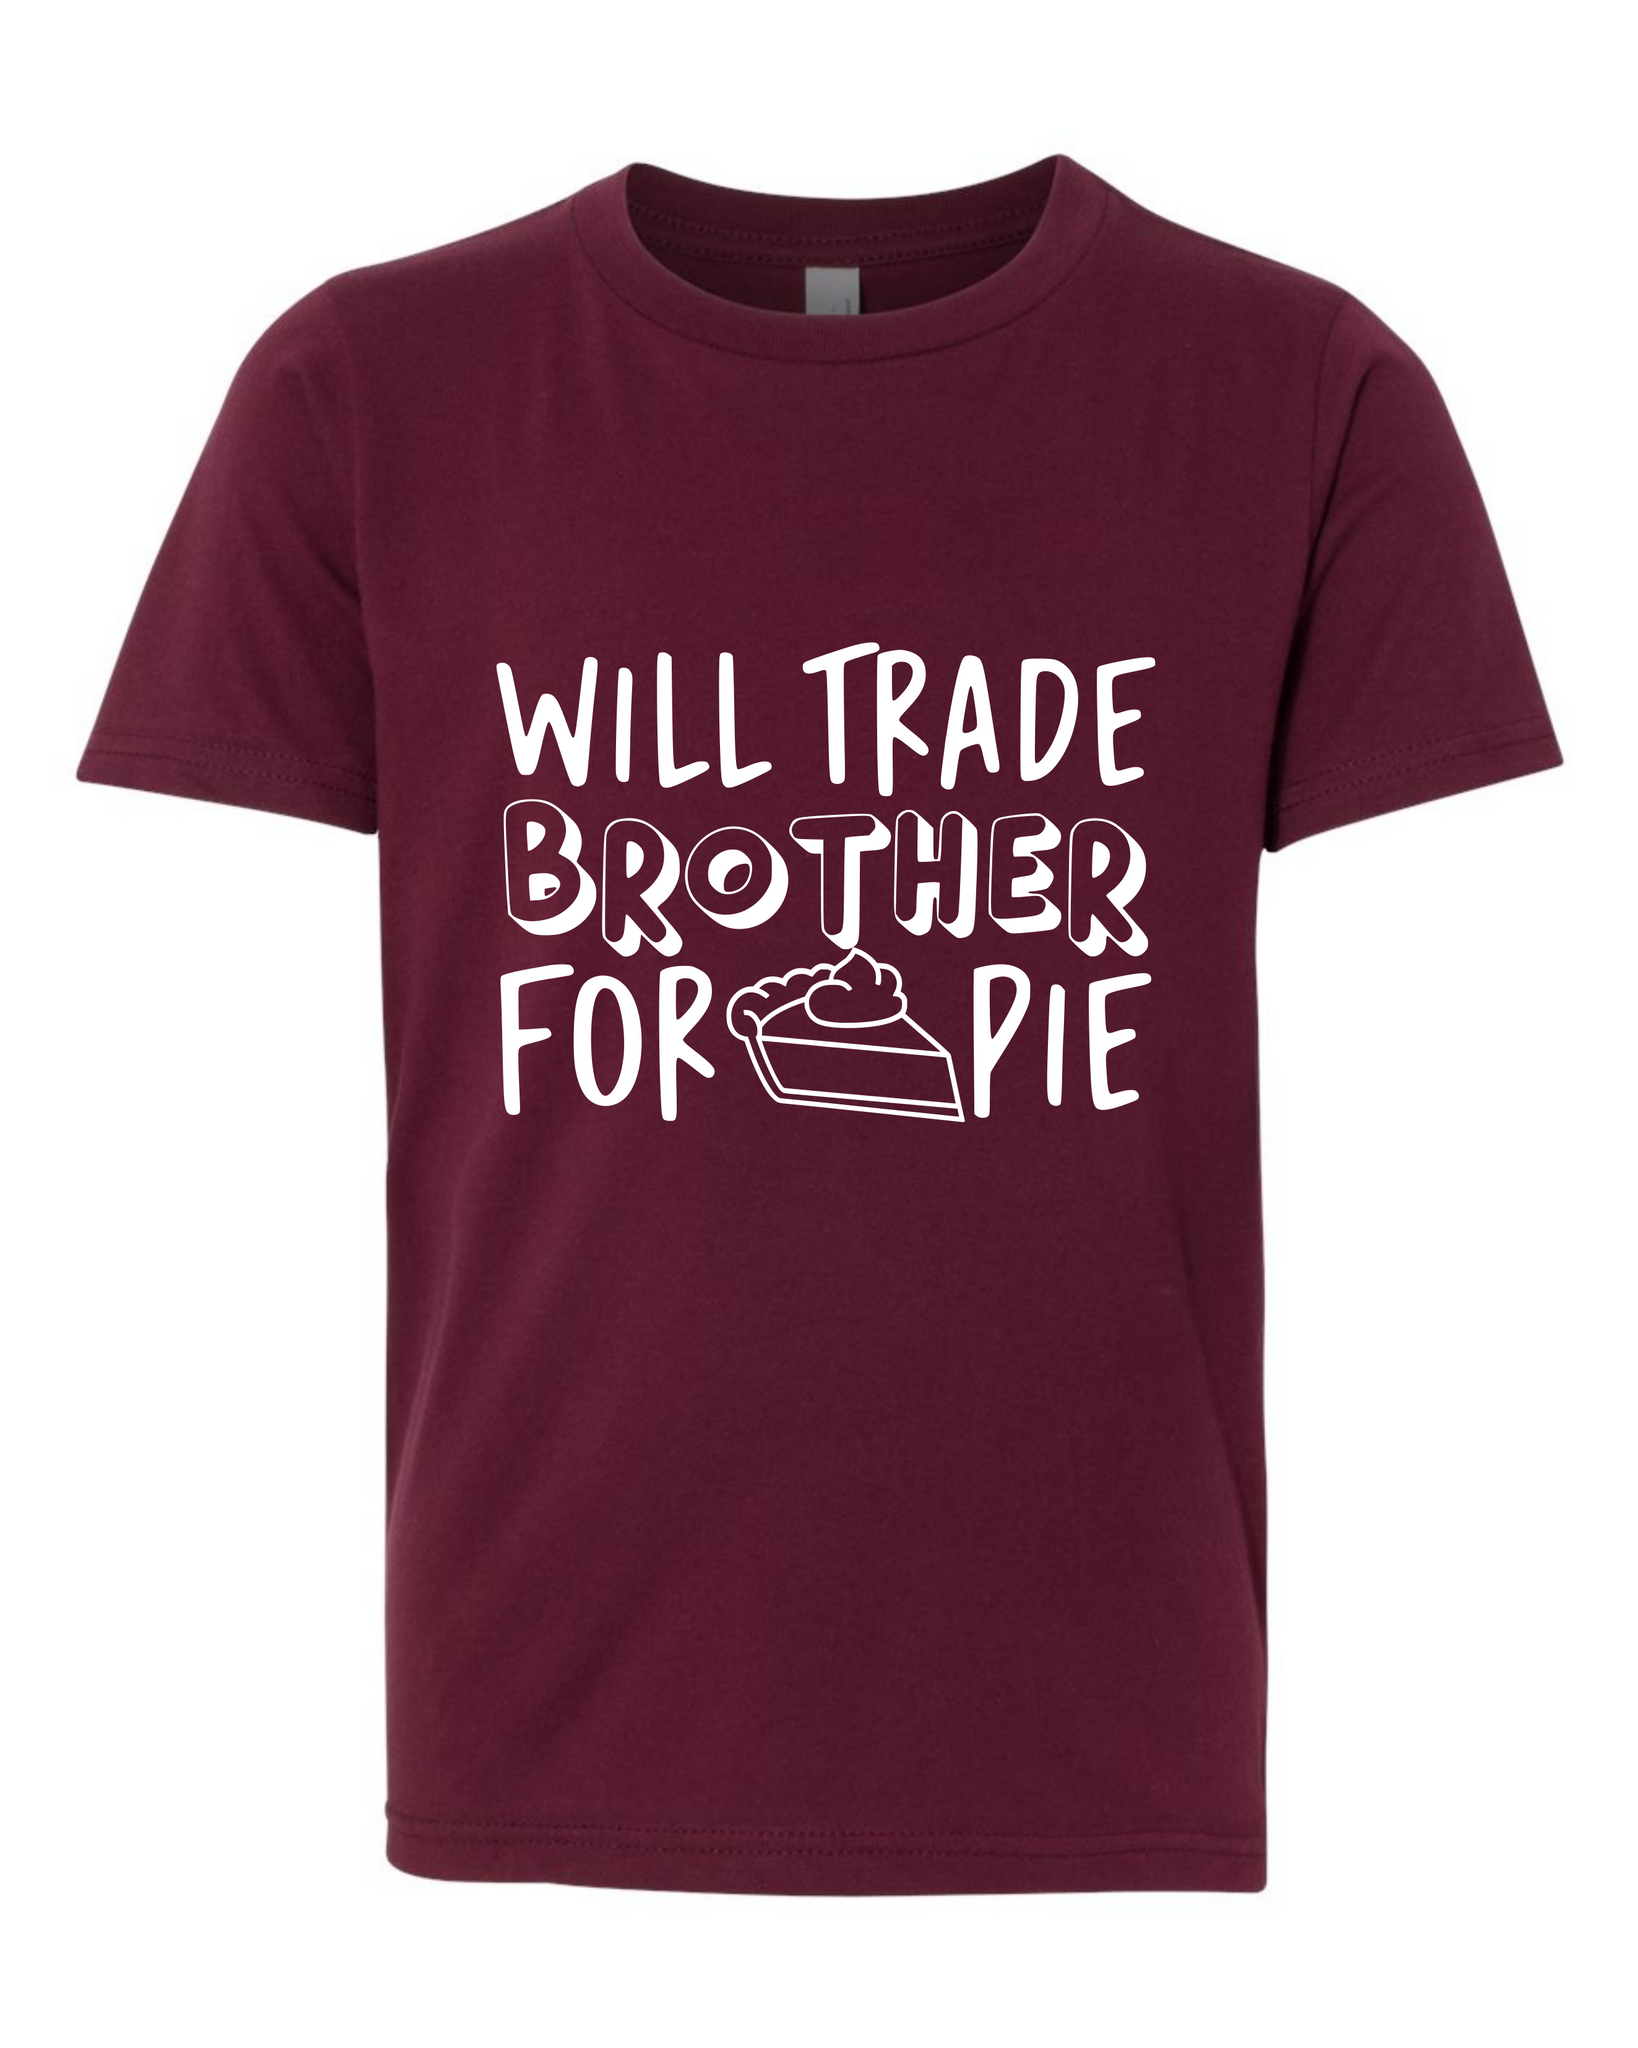 WILL TRADE BROTHER FOR PIE KIDS SHIRT